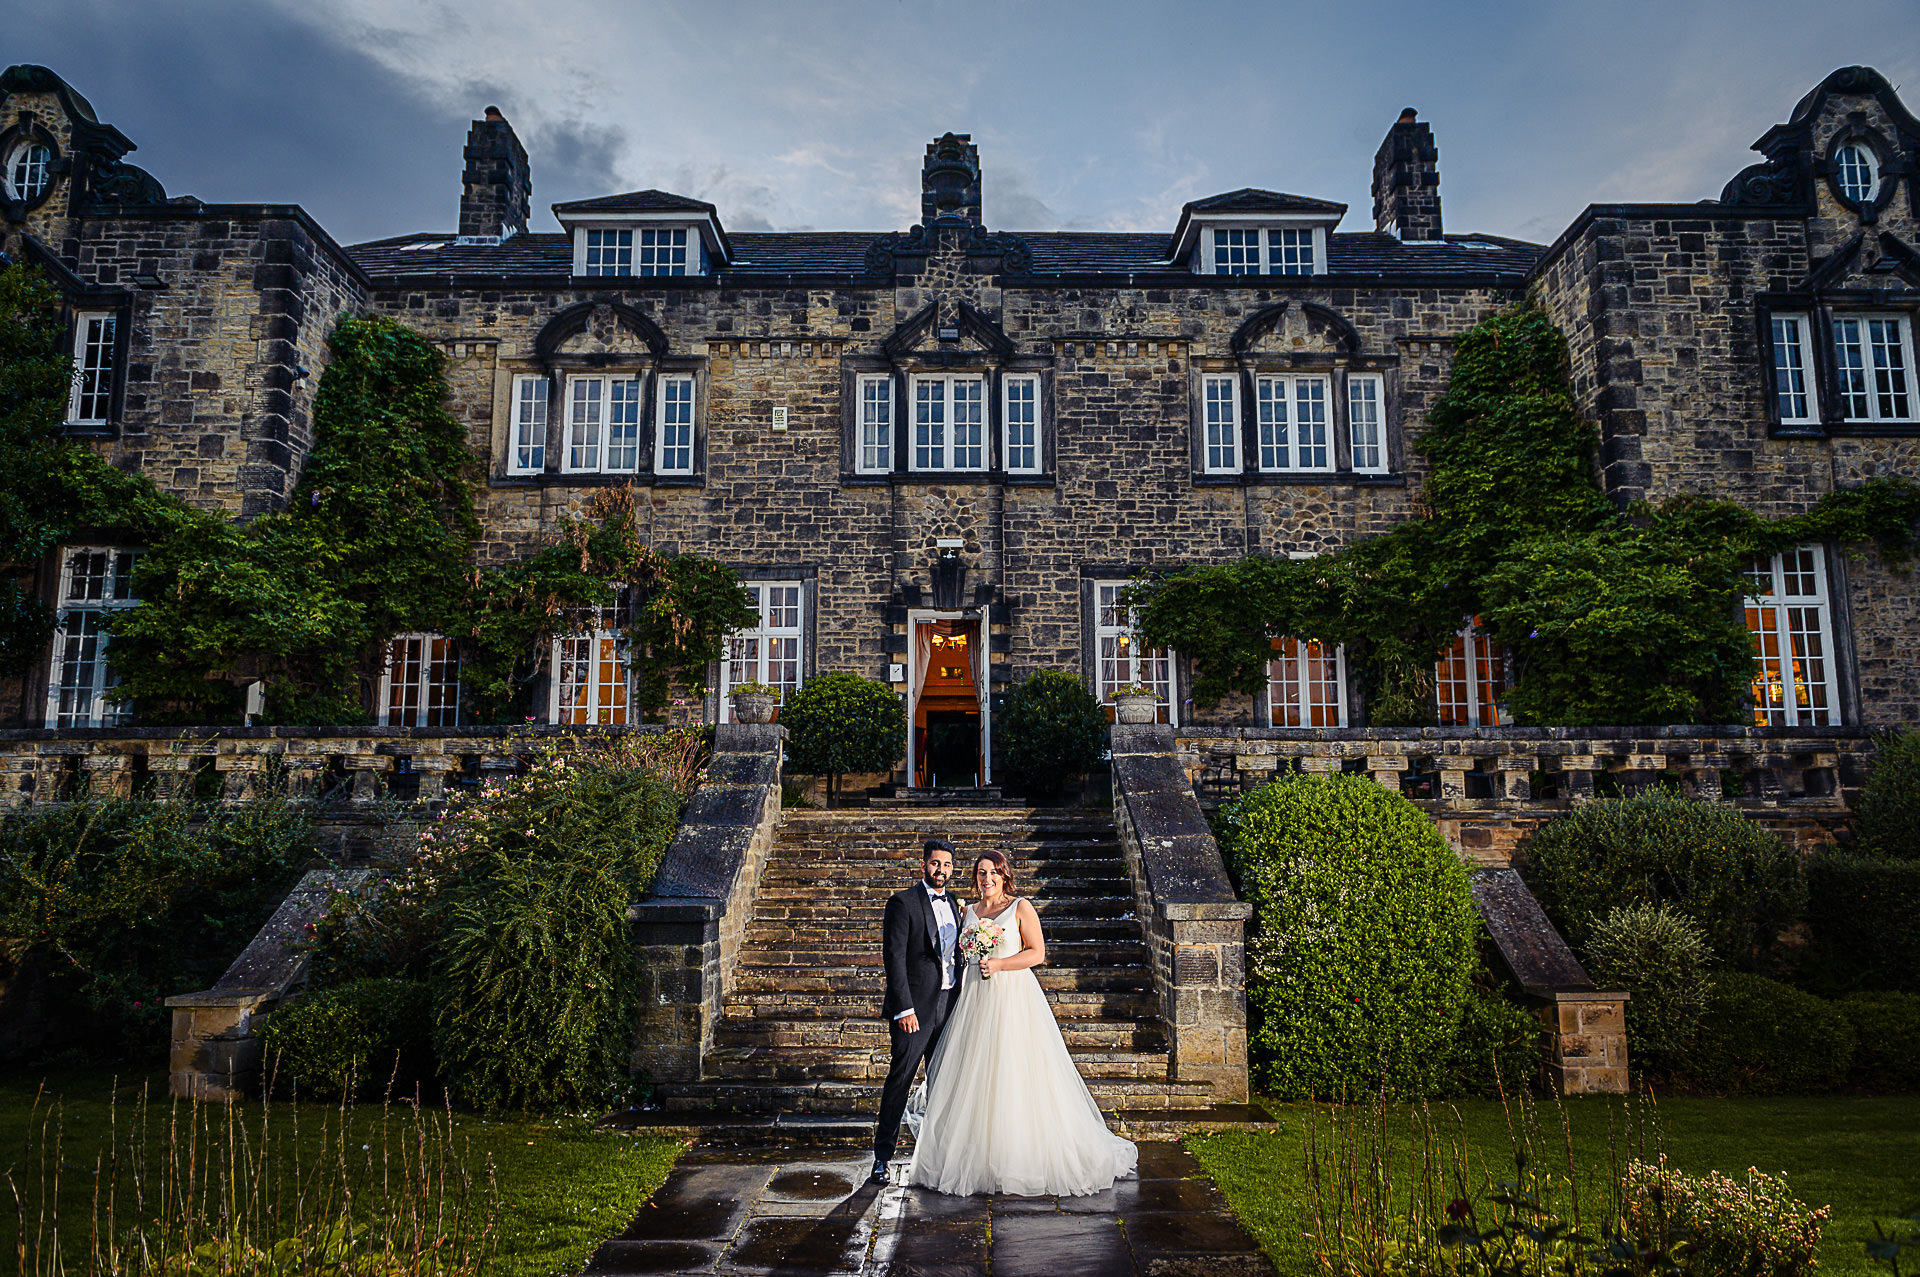 Hoyle Court Wedding Photographer | Alice and Tai’s Official Wedding Photography